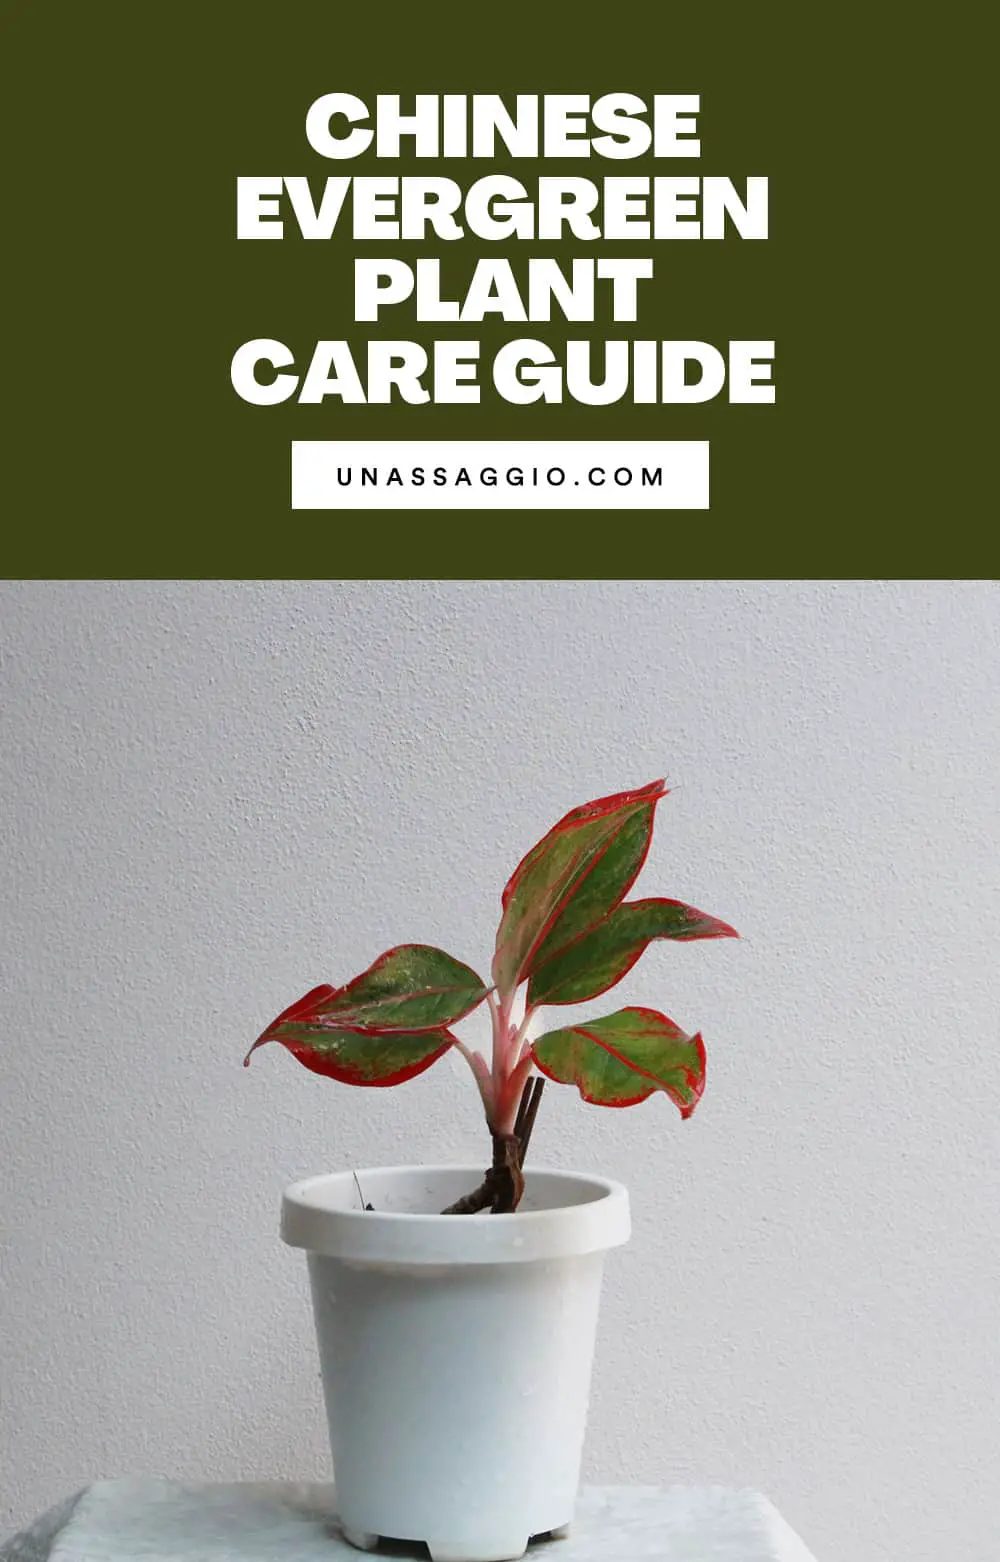 Chinese evergreen Plant Care